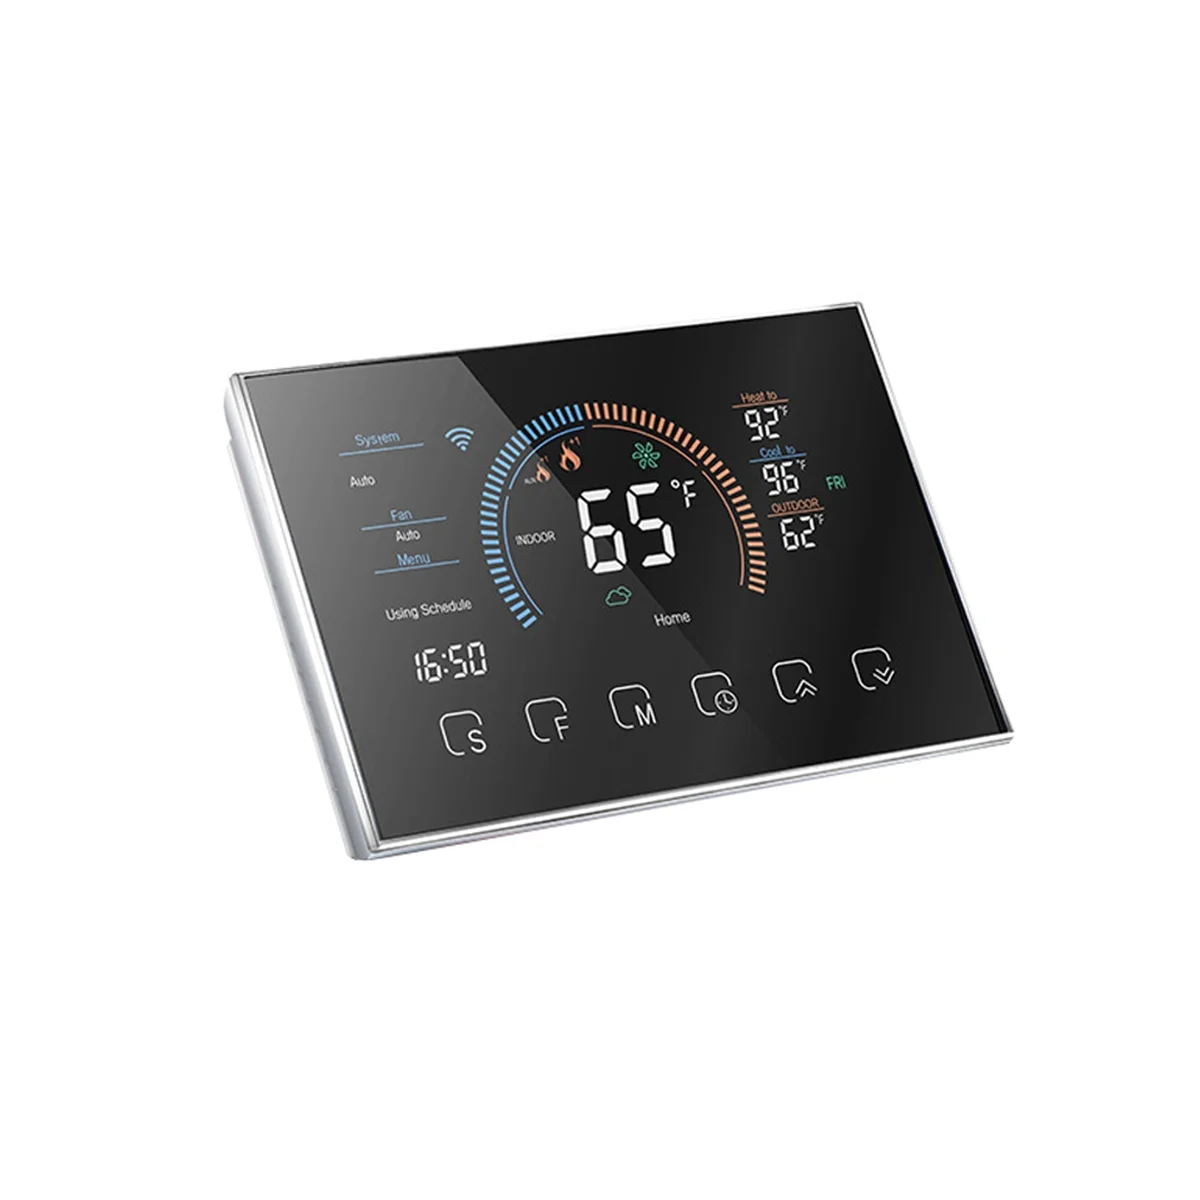 

Smart Thermostat for Home, WiFi Programmable Digital Thermostat, Energy Saving, C-Wire Adapter Included, DIY Install